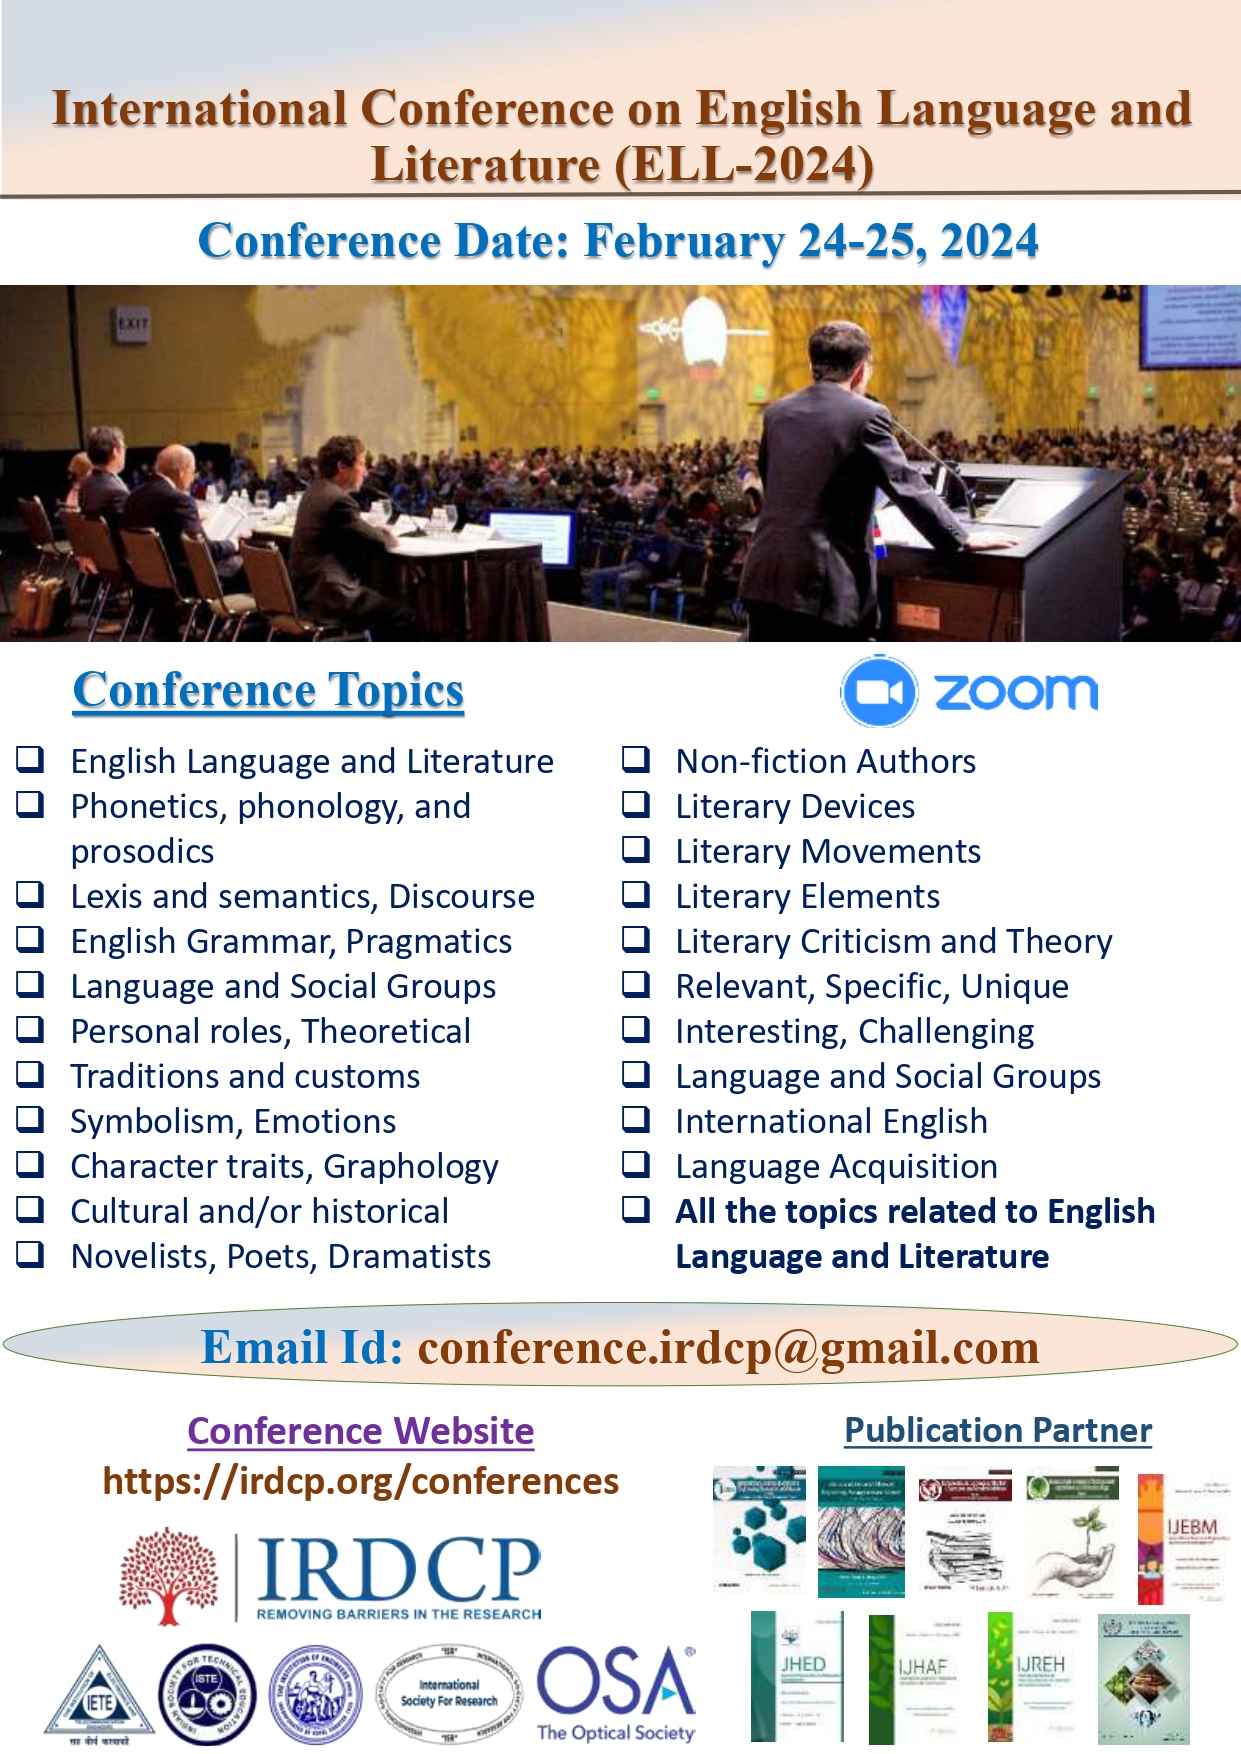 International Conference on English Language and Literature (ELL2024